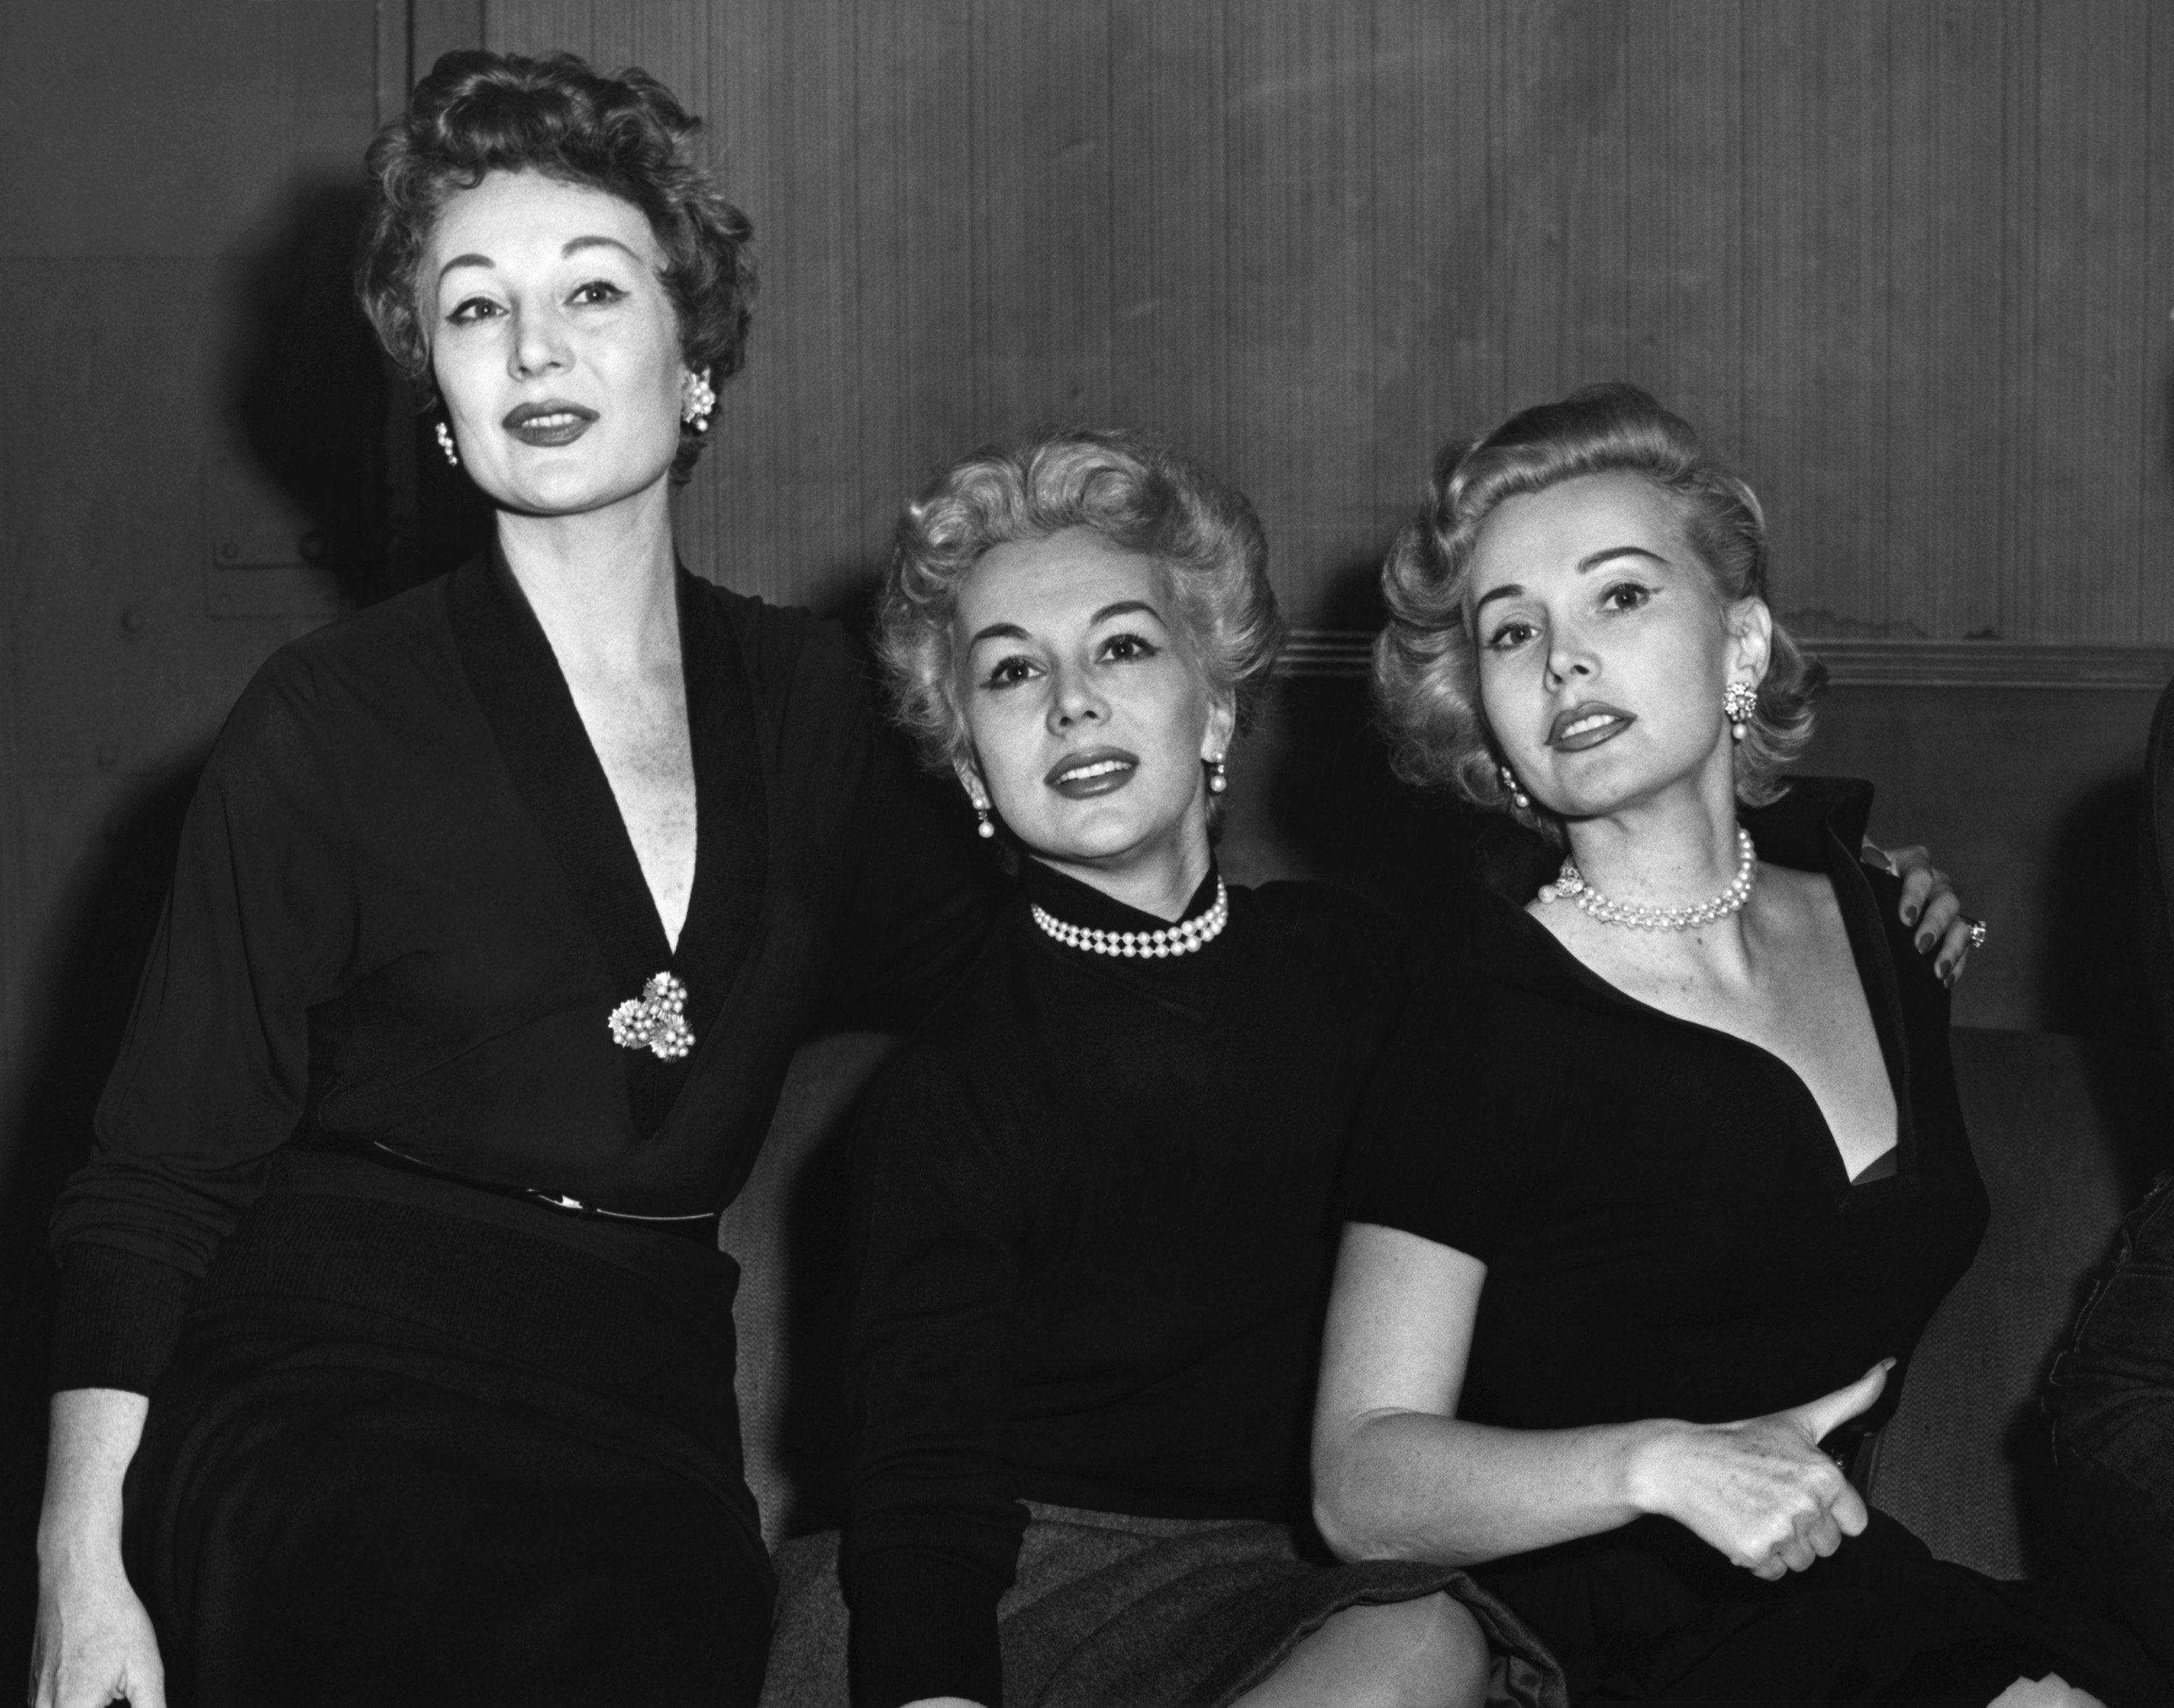 From left: Socialites Magda Gabor, Eva Gabor, and Zsa Zsa Gabor. | Photo: Getty Images